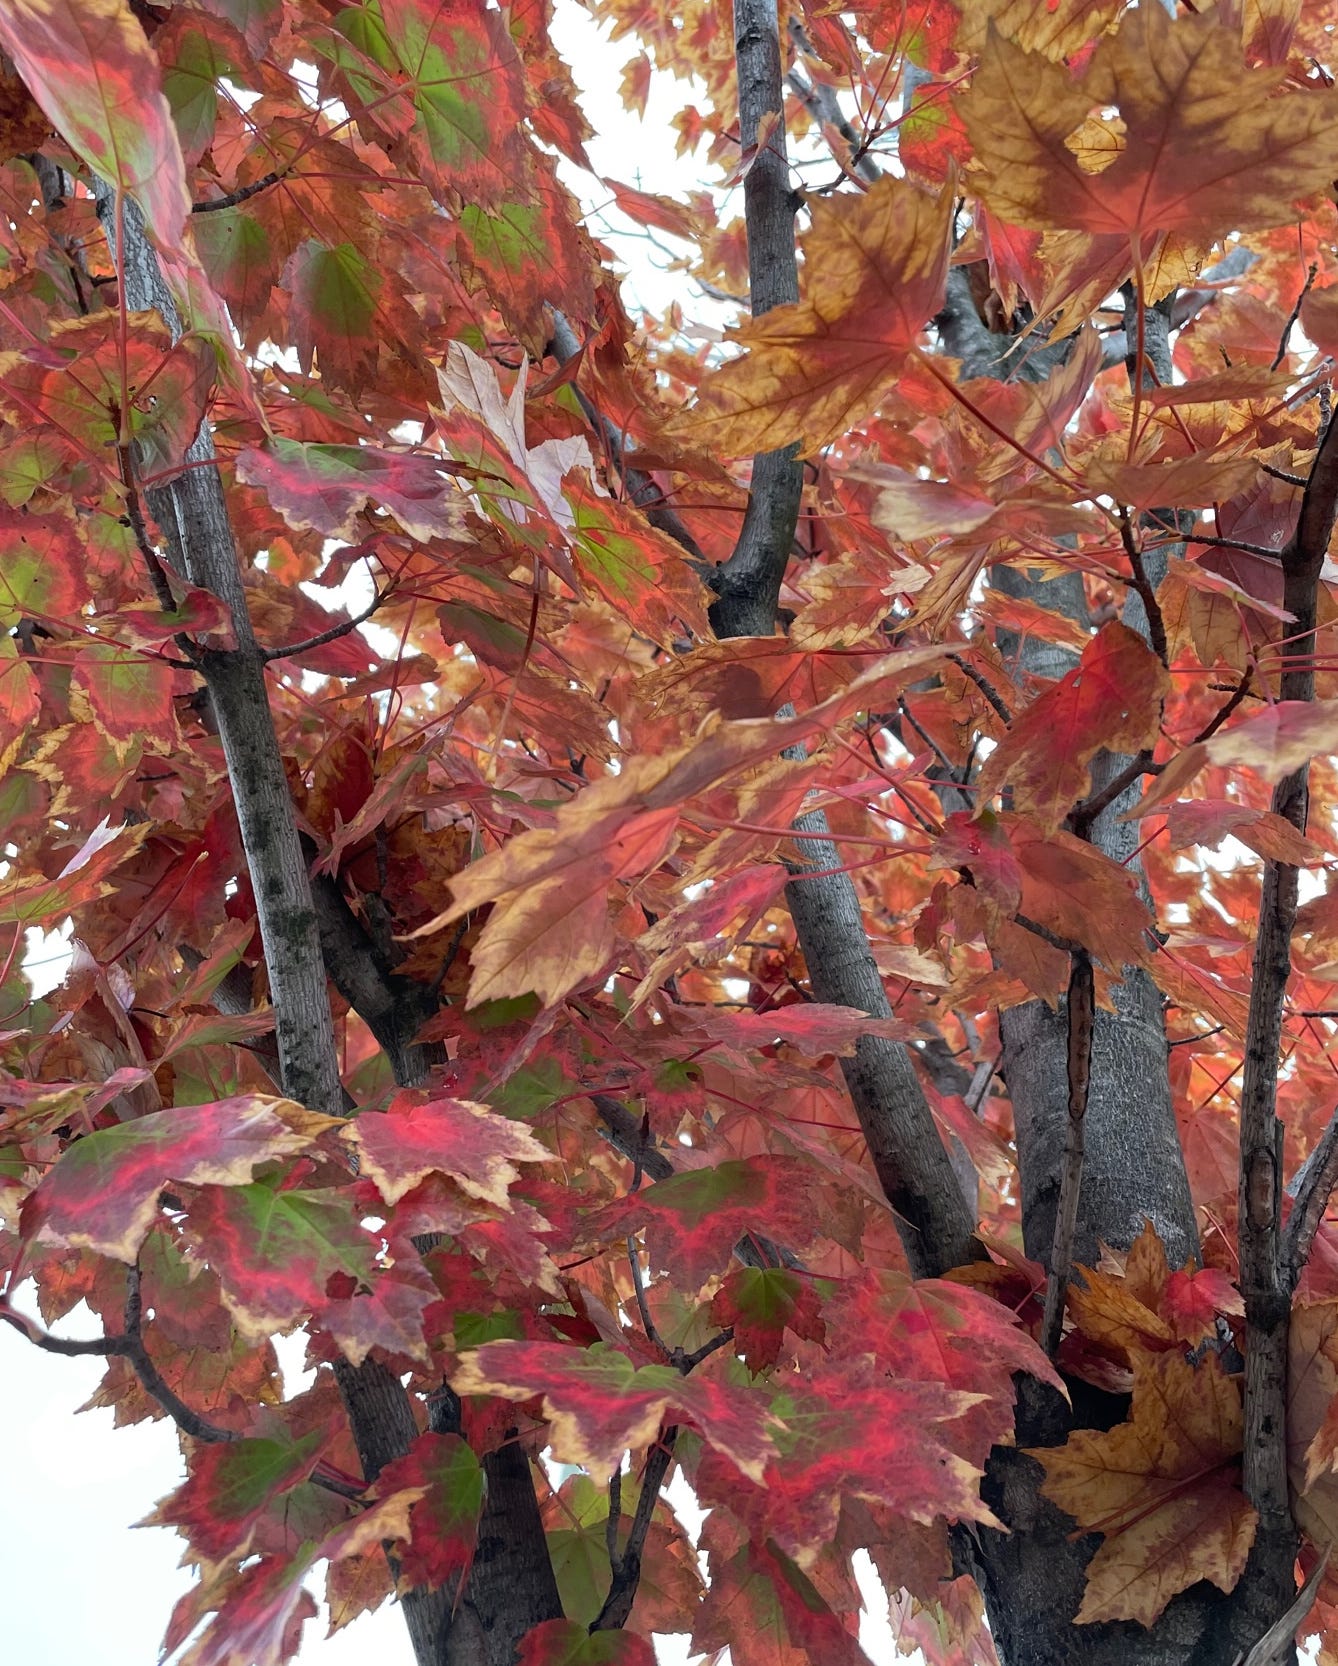 Amazing pattern of fall color on a maple tree